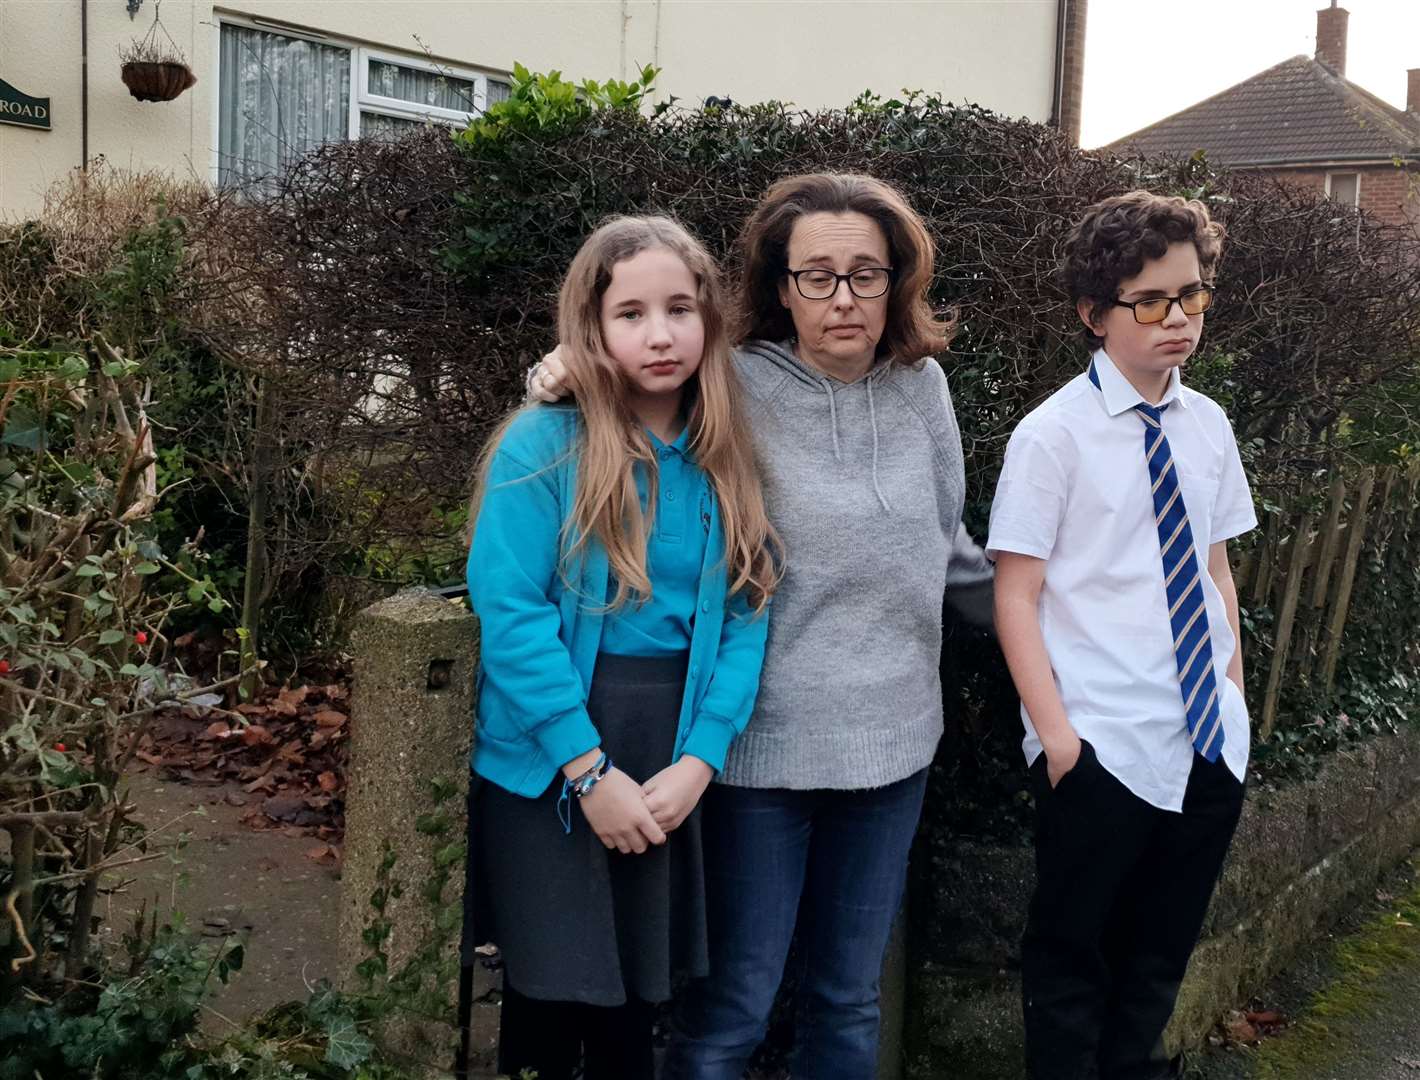 Mum Lorraine Smith with daughter Amelia, 11 and son Joey, 14